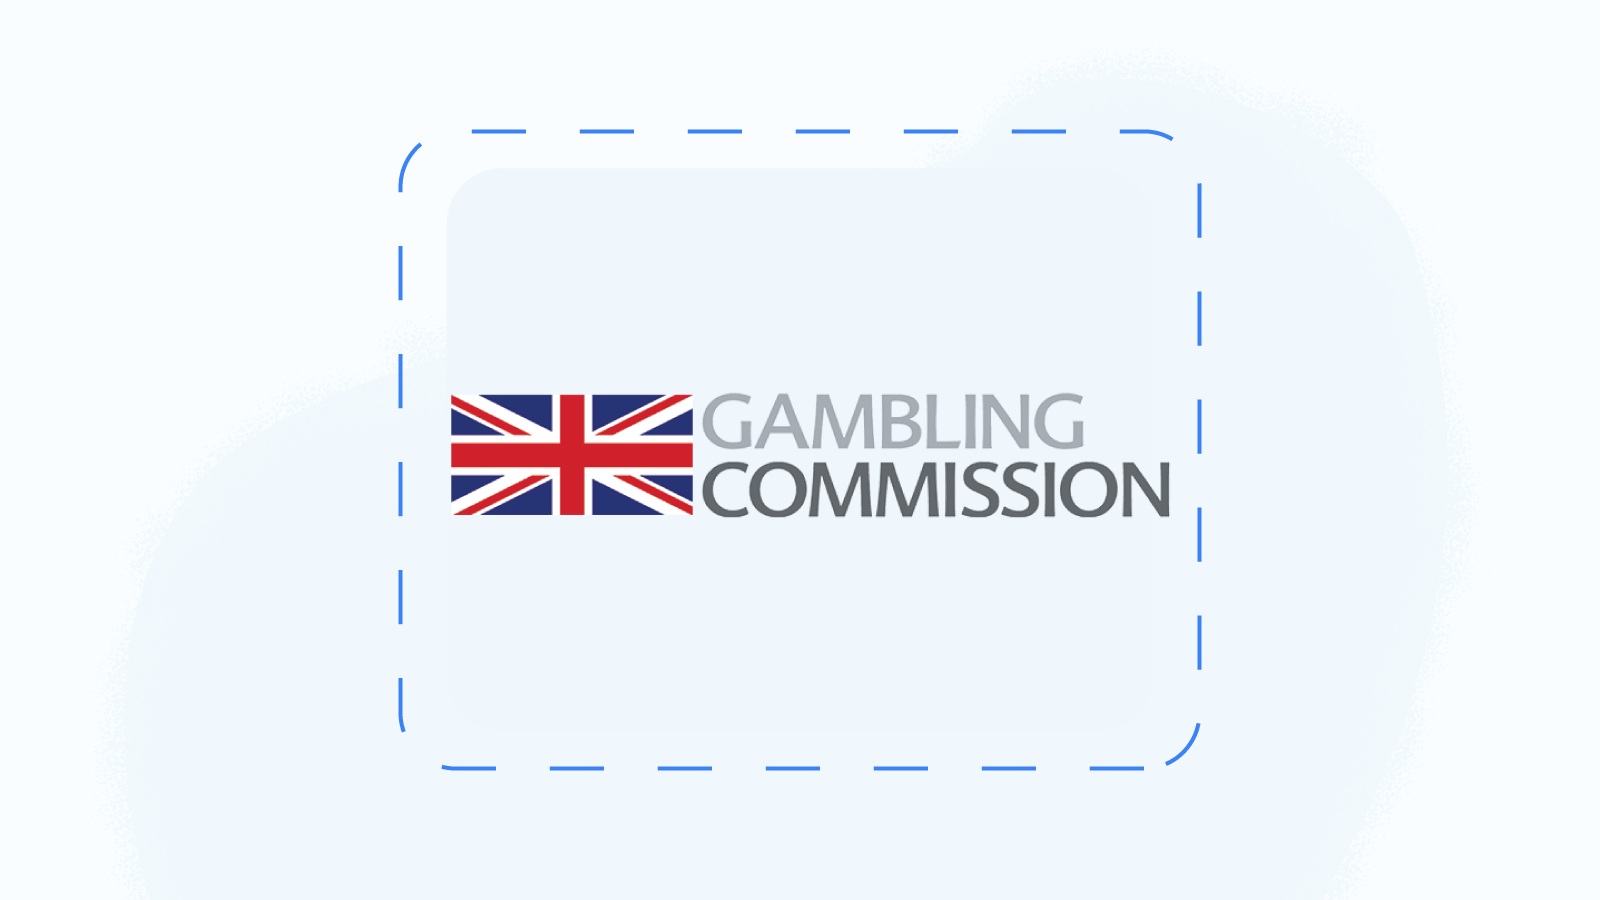 The Gambling Commission